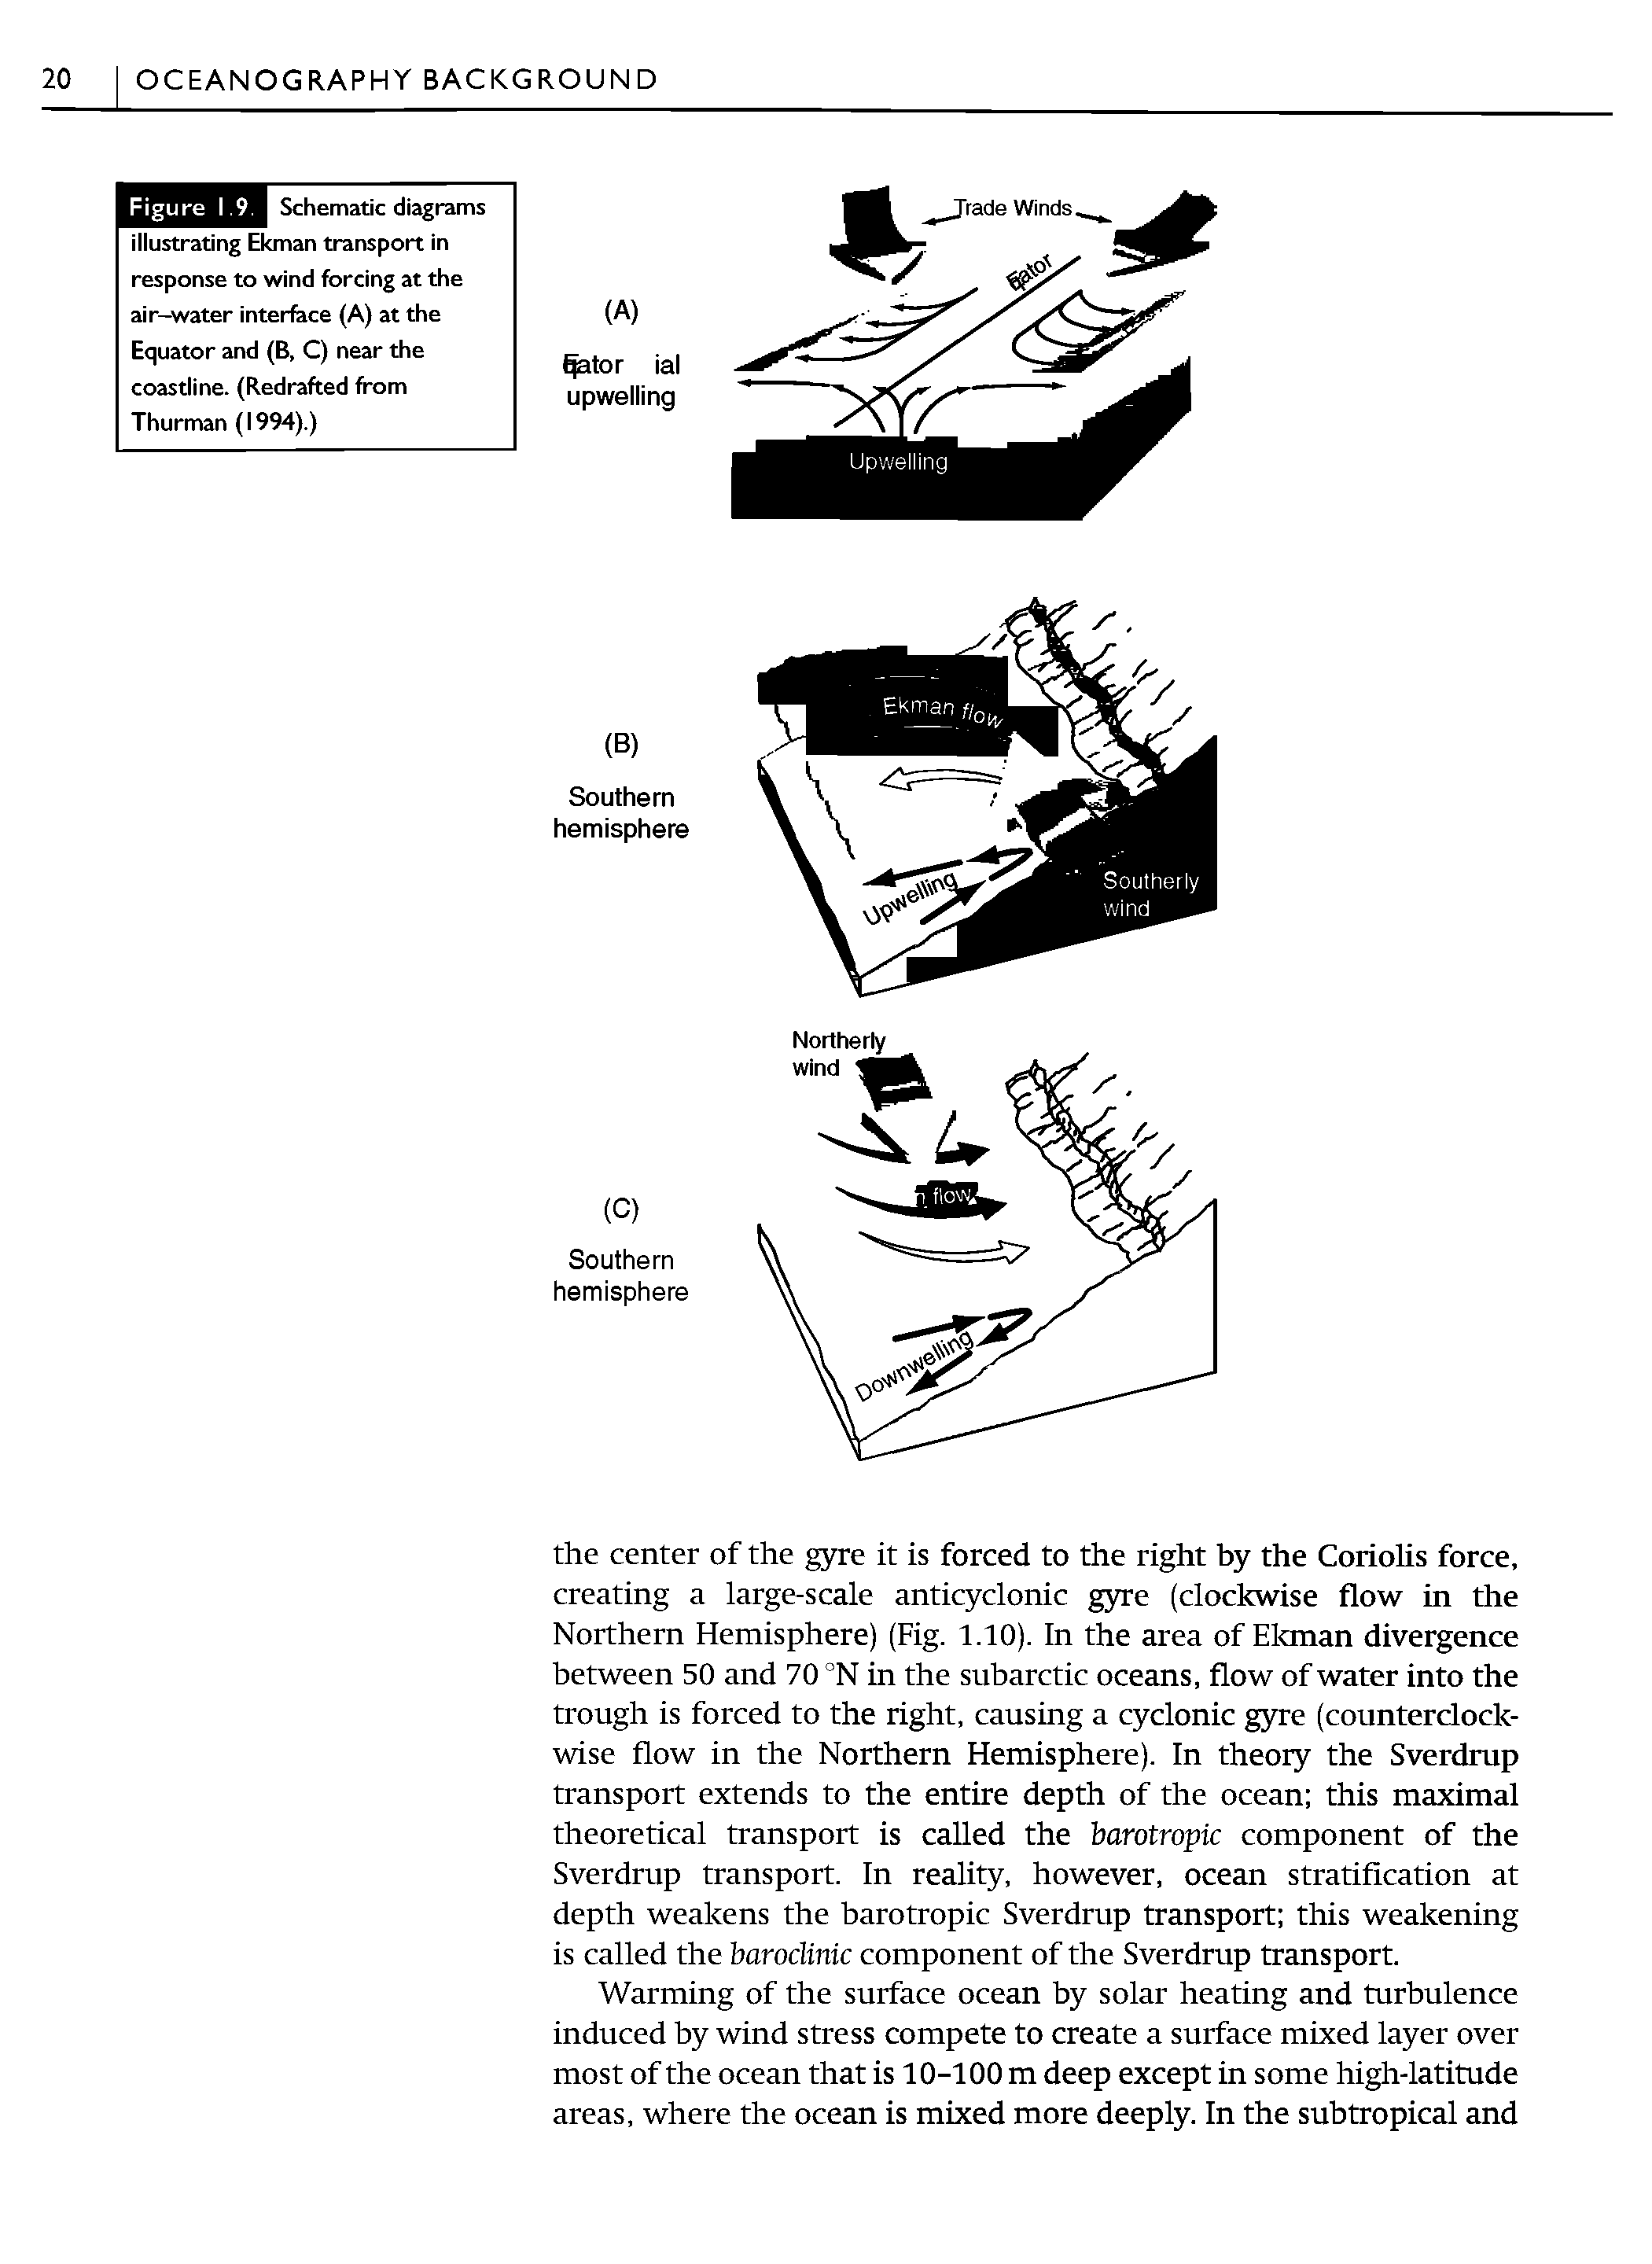 Schematic diagrams illustrating Ekman transport in response to wind forcing at the air—water interface (A) at the Equator and (B, C) near the coastline. (Redrafted from Thurman (1994).)...